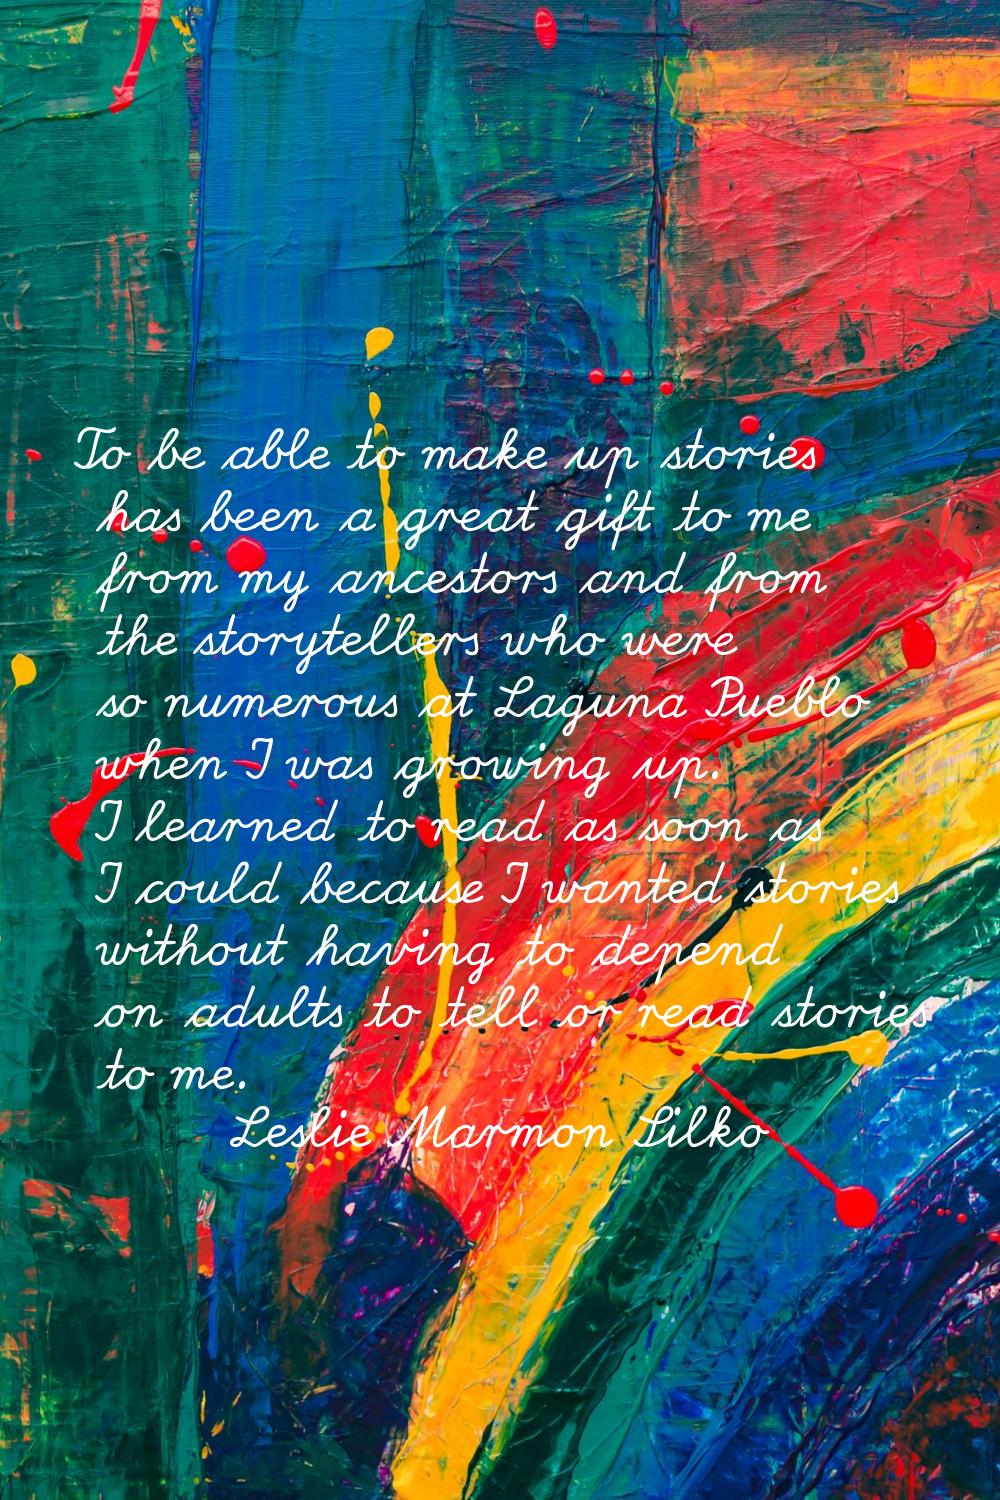 To be able to make up stories has been a great gift to me from my ancestors and from the storytelle